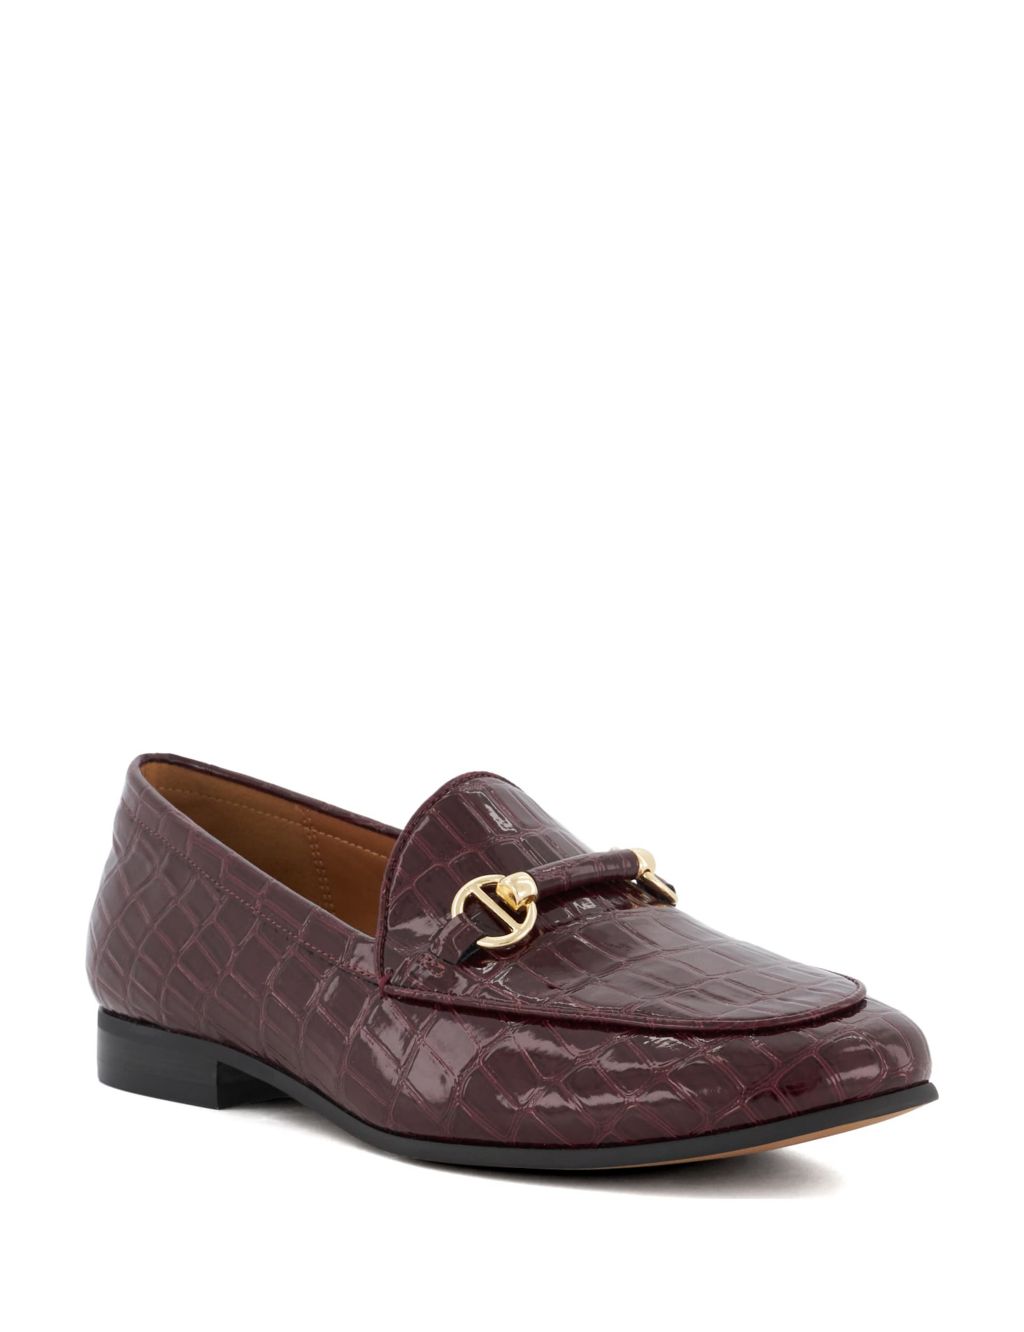 Leather Bar Trim Flat Loafers image 2